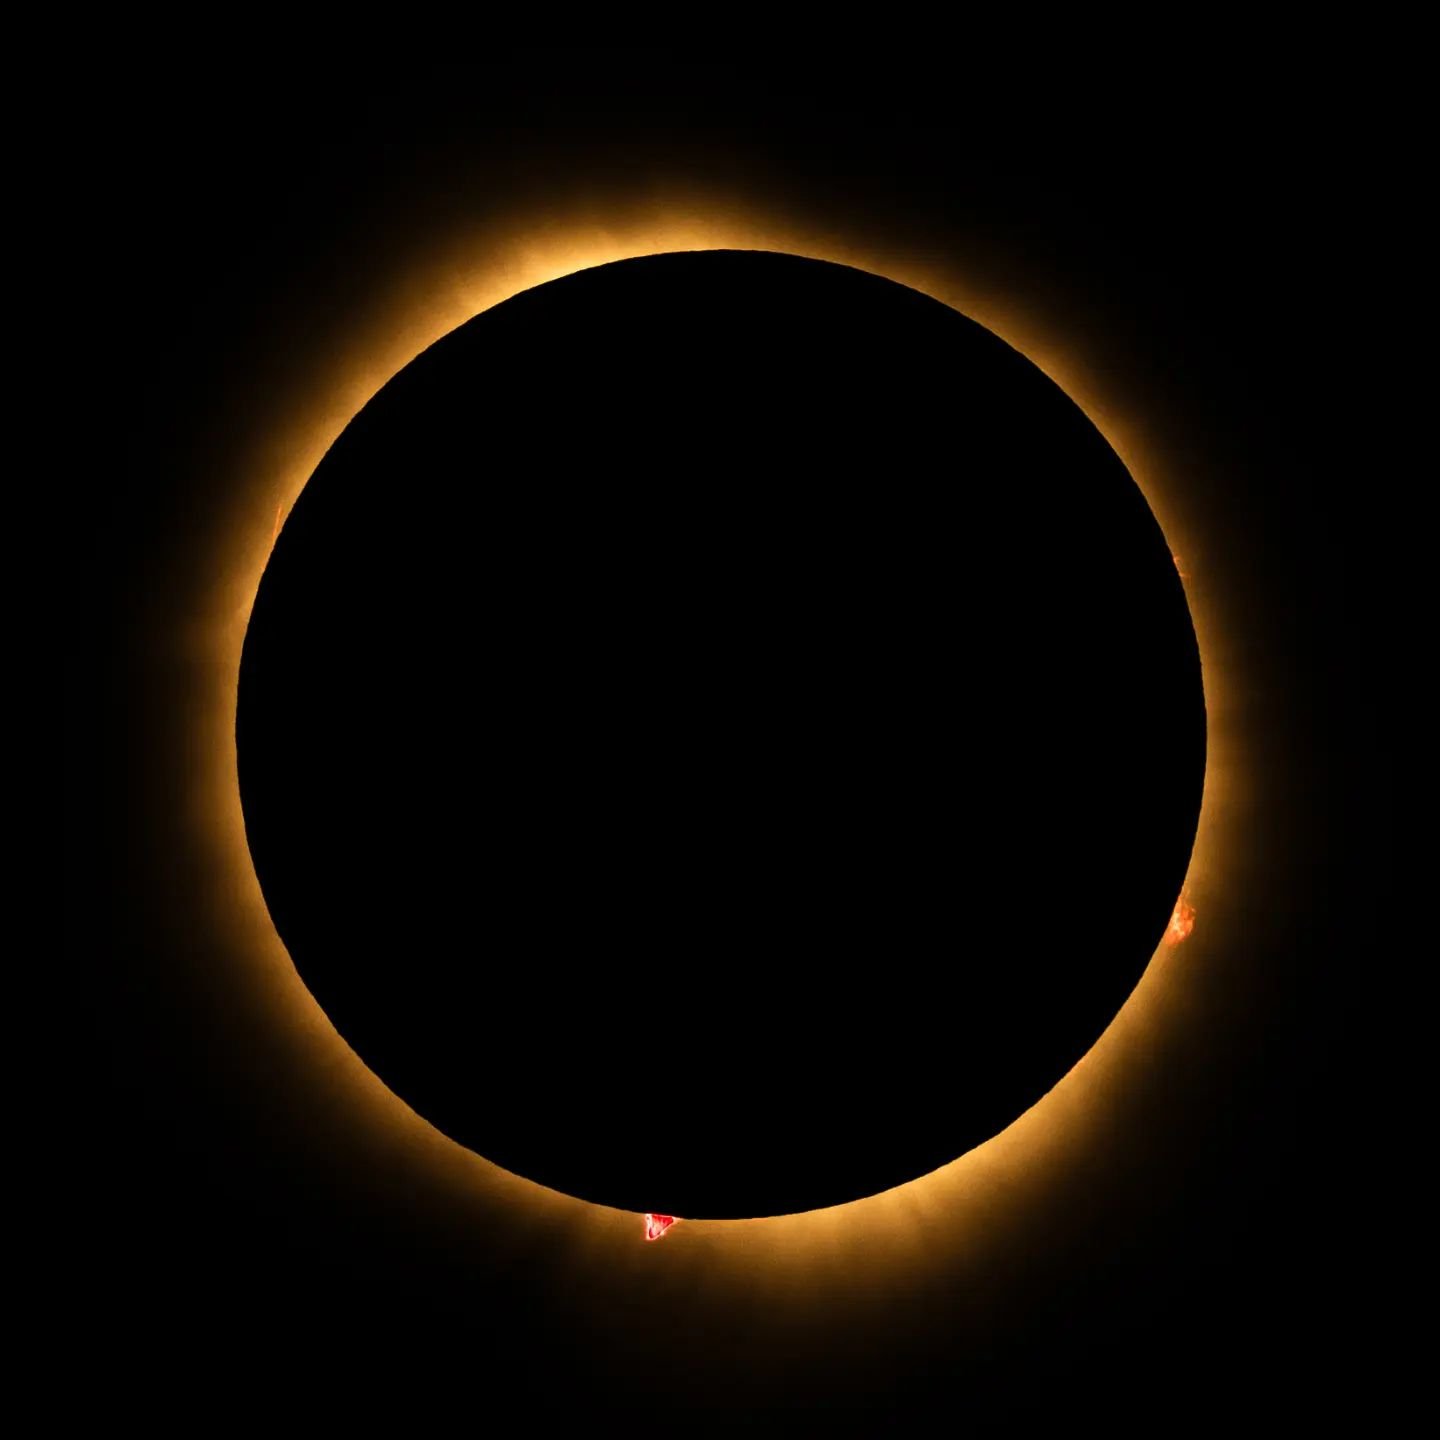 Wow

That was pretty incredible! So thankful that there were minimal clouds!!!

#eclipse #eclipse2024 #totalsolareclipse2024 #totalsolareclipse #eclipseinhancock #eclipseinhancockcounty